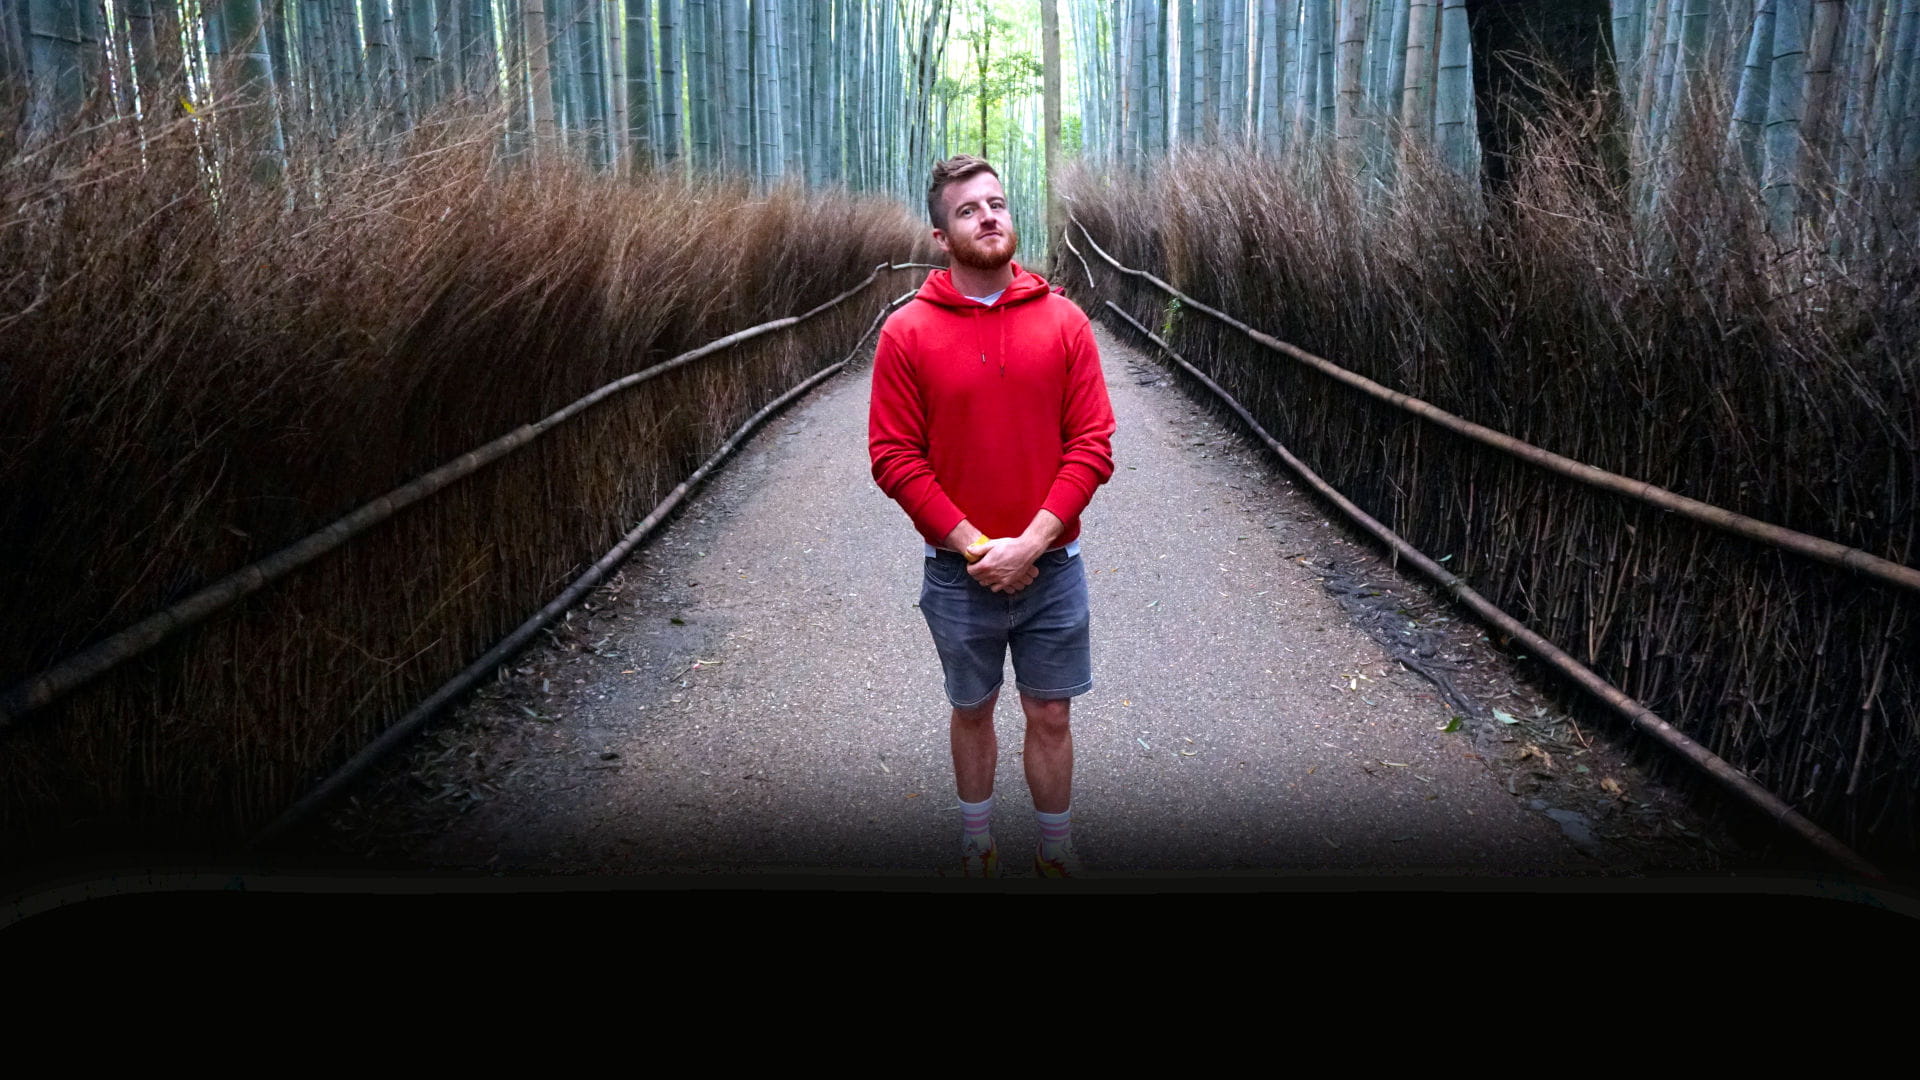 Ben Coomber in Japanese bamboo forest